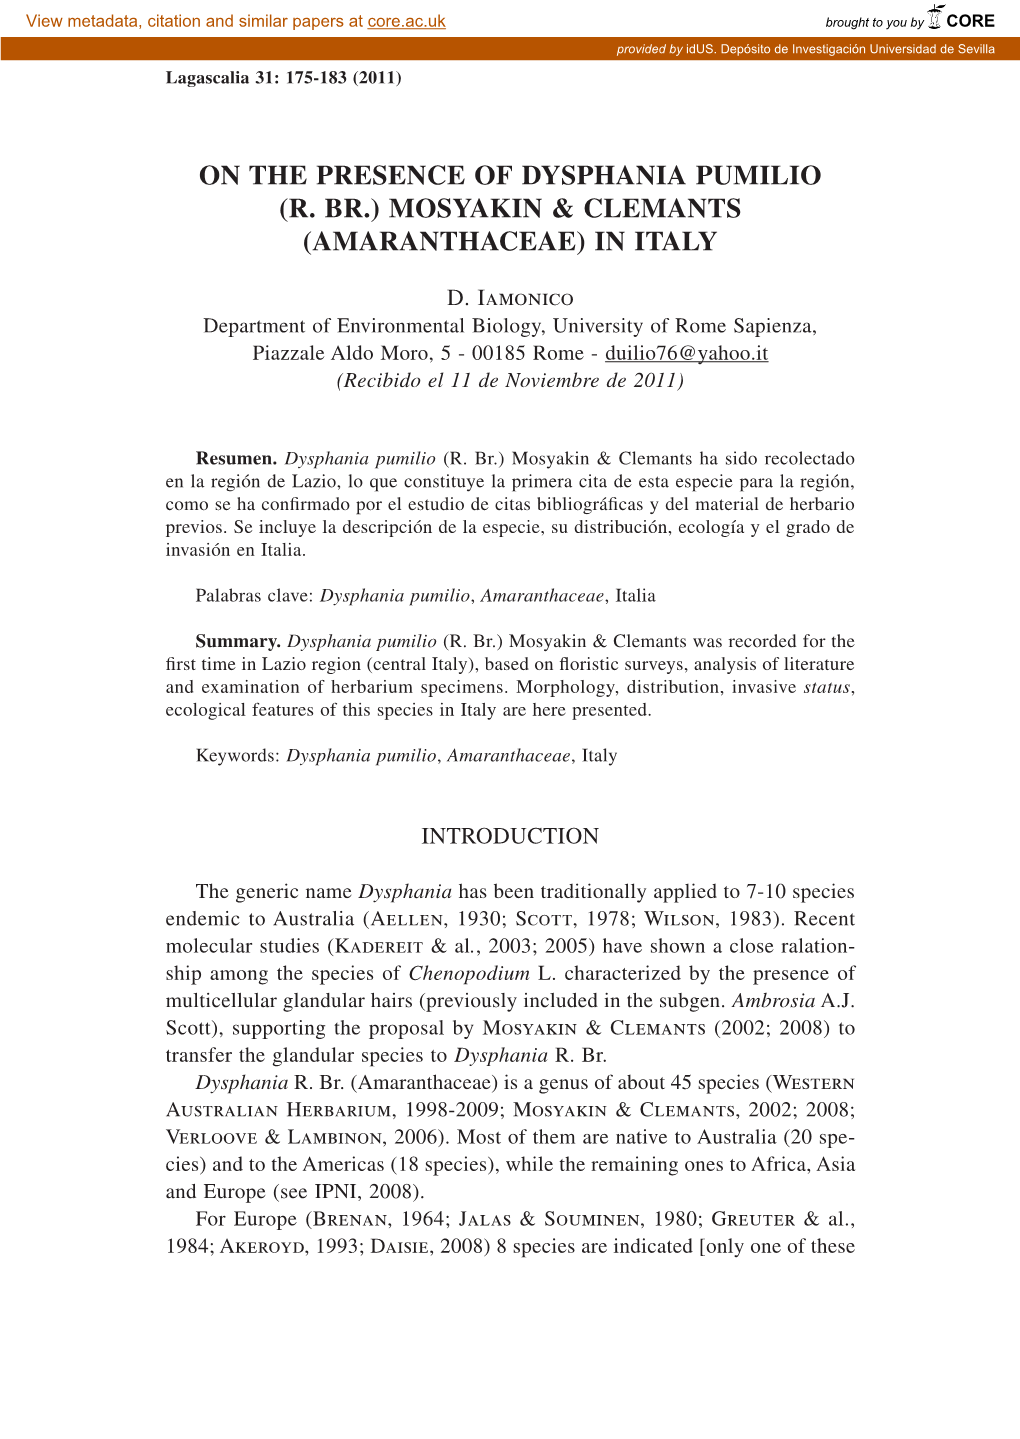 On the Presence of Dysphania Pumilio (R. Br.) Mosyakin & Clemants (Amaranthaceae) in Italy